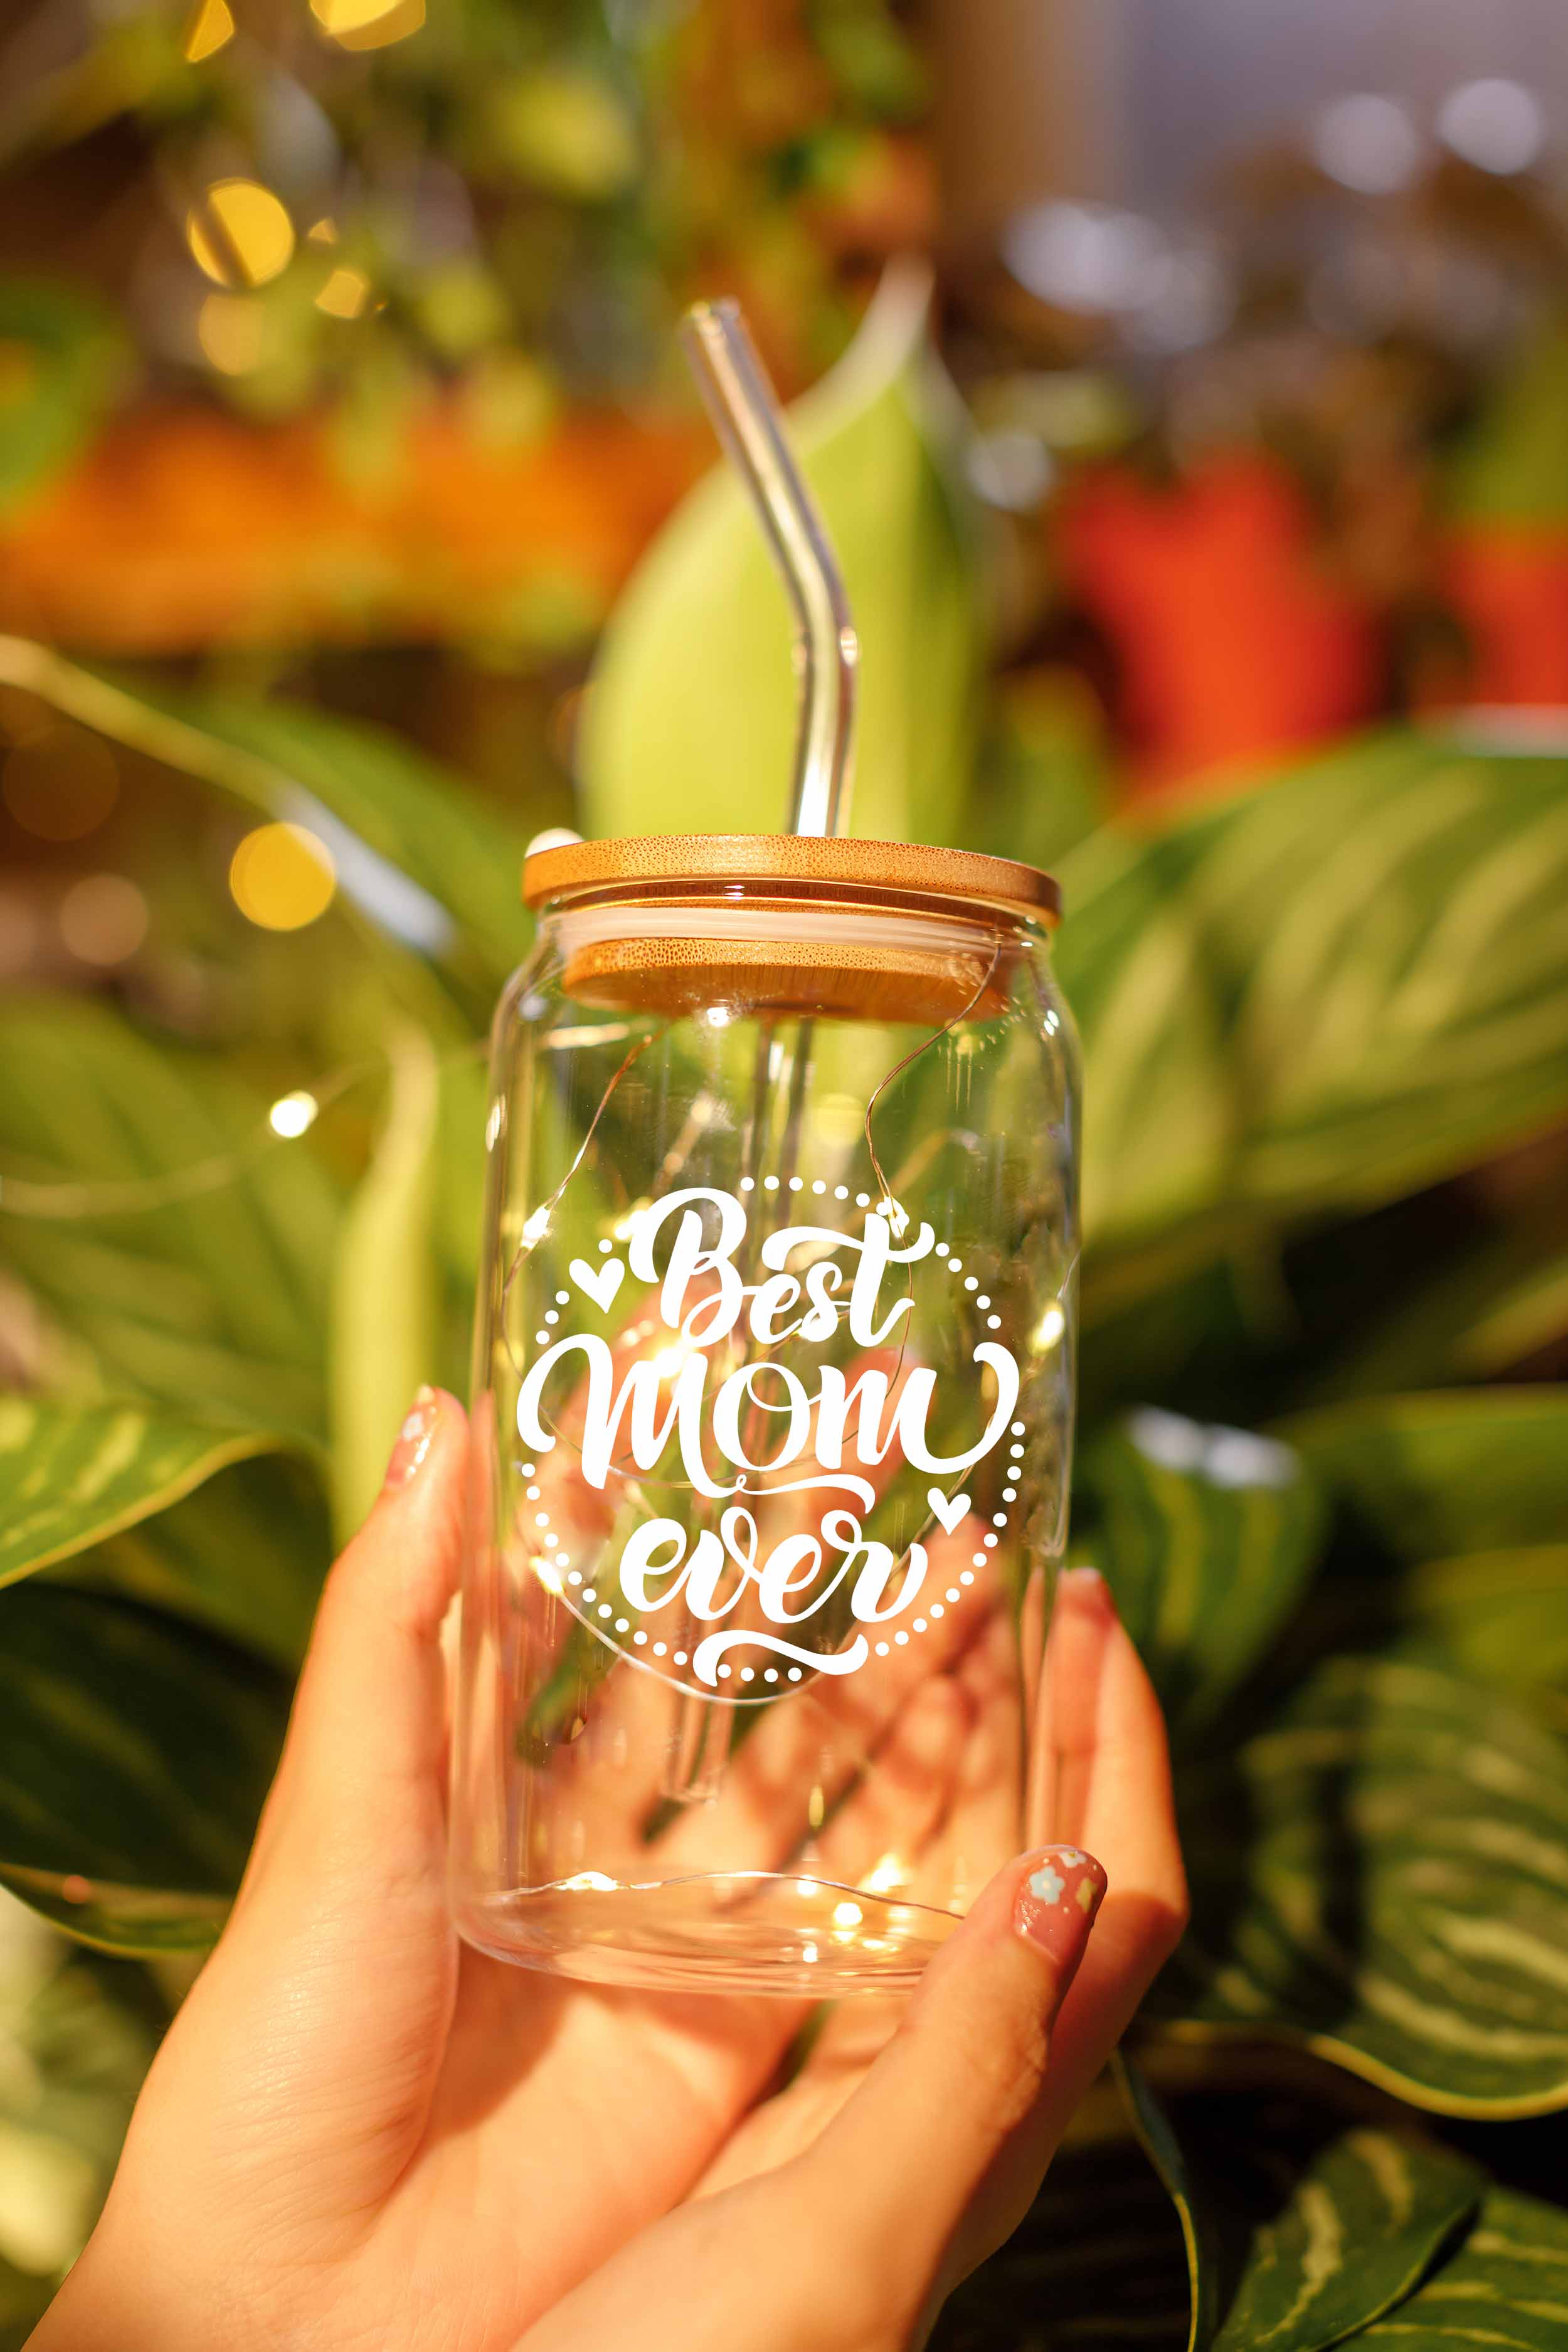 Good Gifts For Mom - Mother Day Gifts, Mom Birthday Gifts, Useful Gifts For  Mom Birthday - Presents For Mom, Mother Daughter Gifts - 16OZ Can Glass